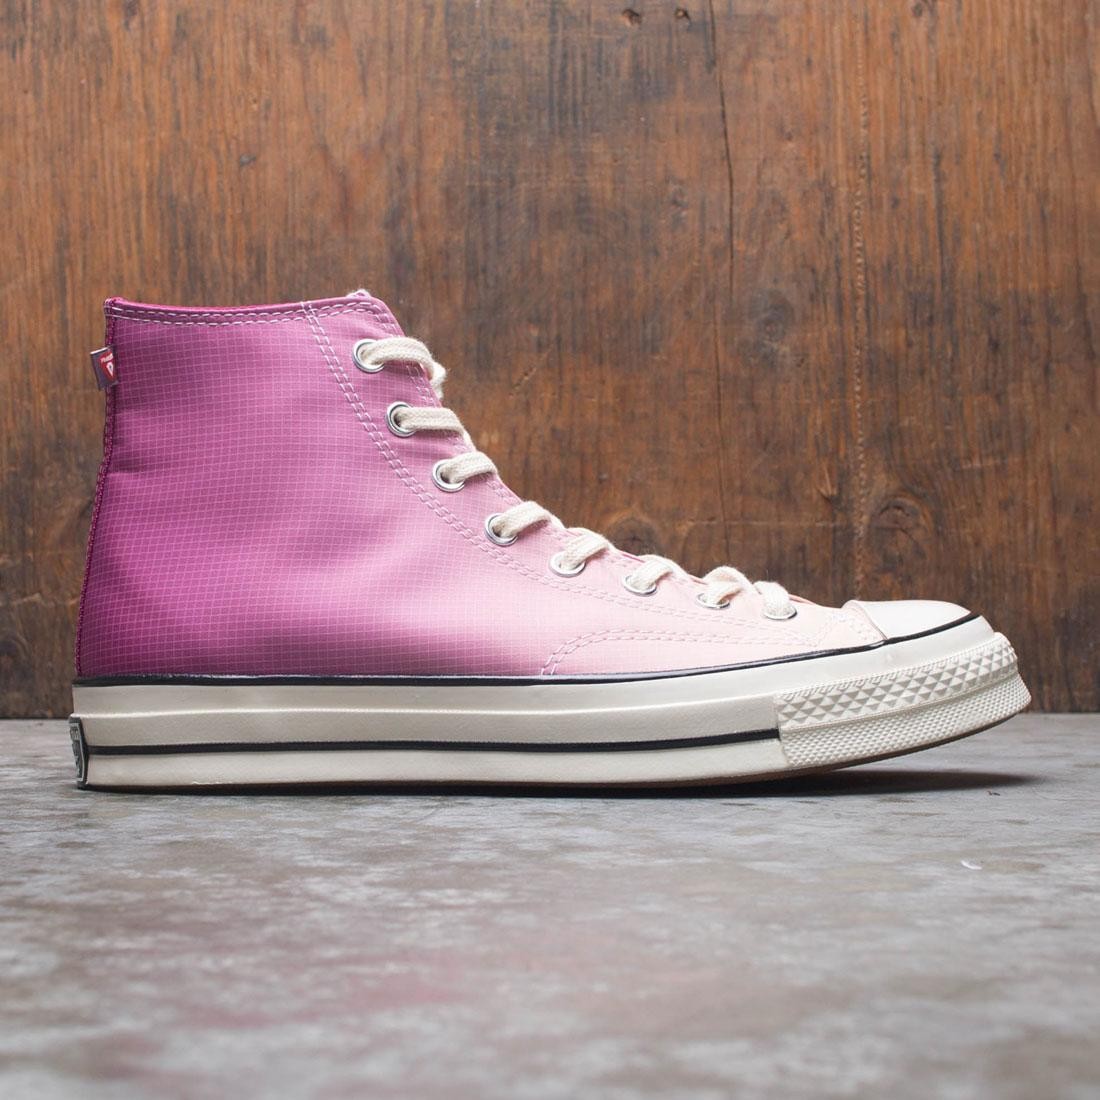 converse red rose